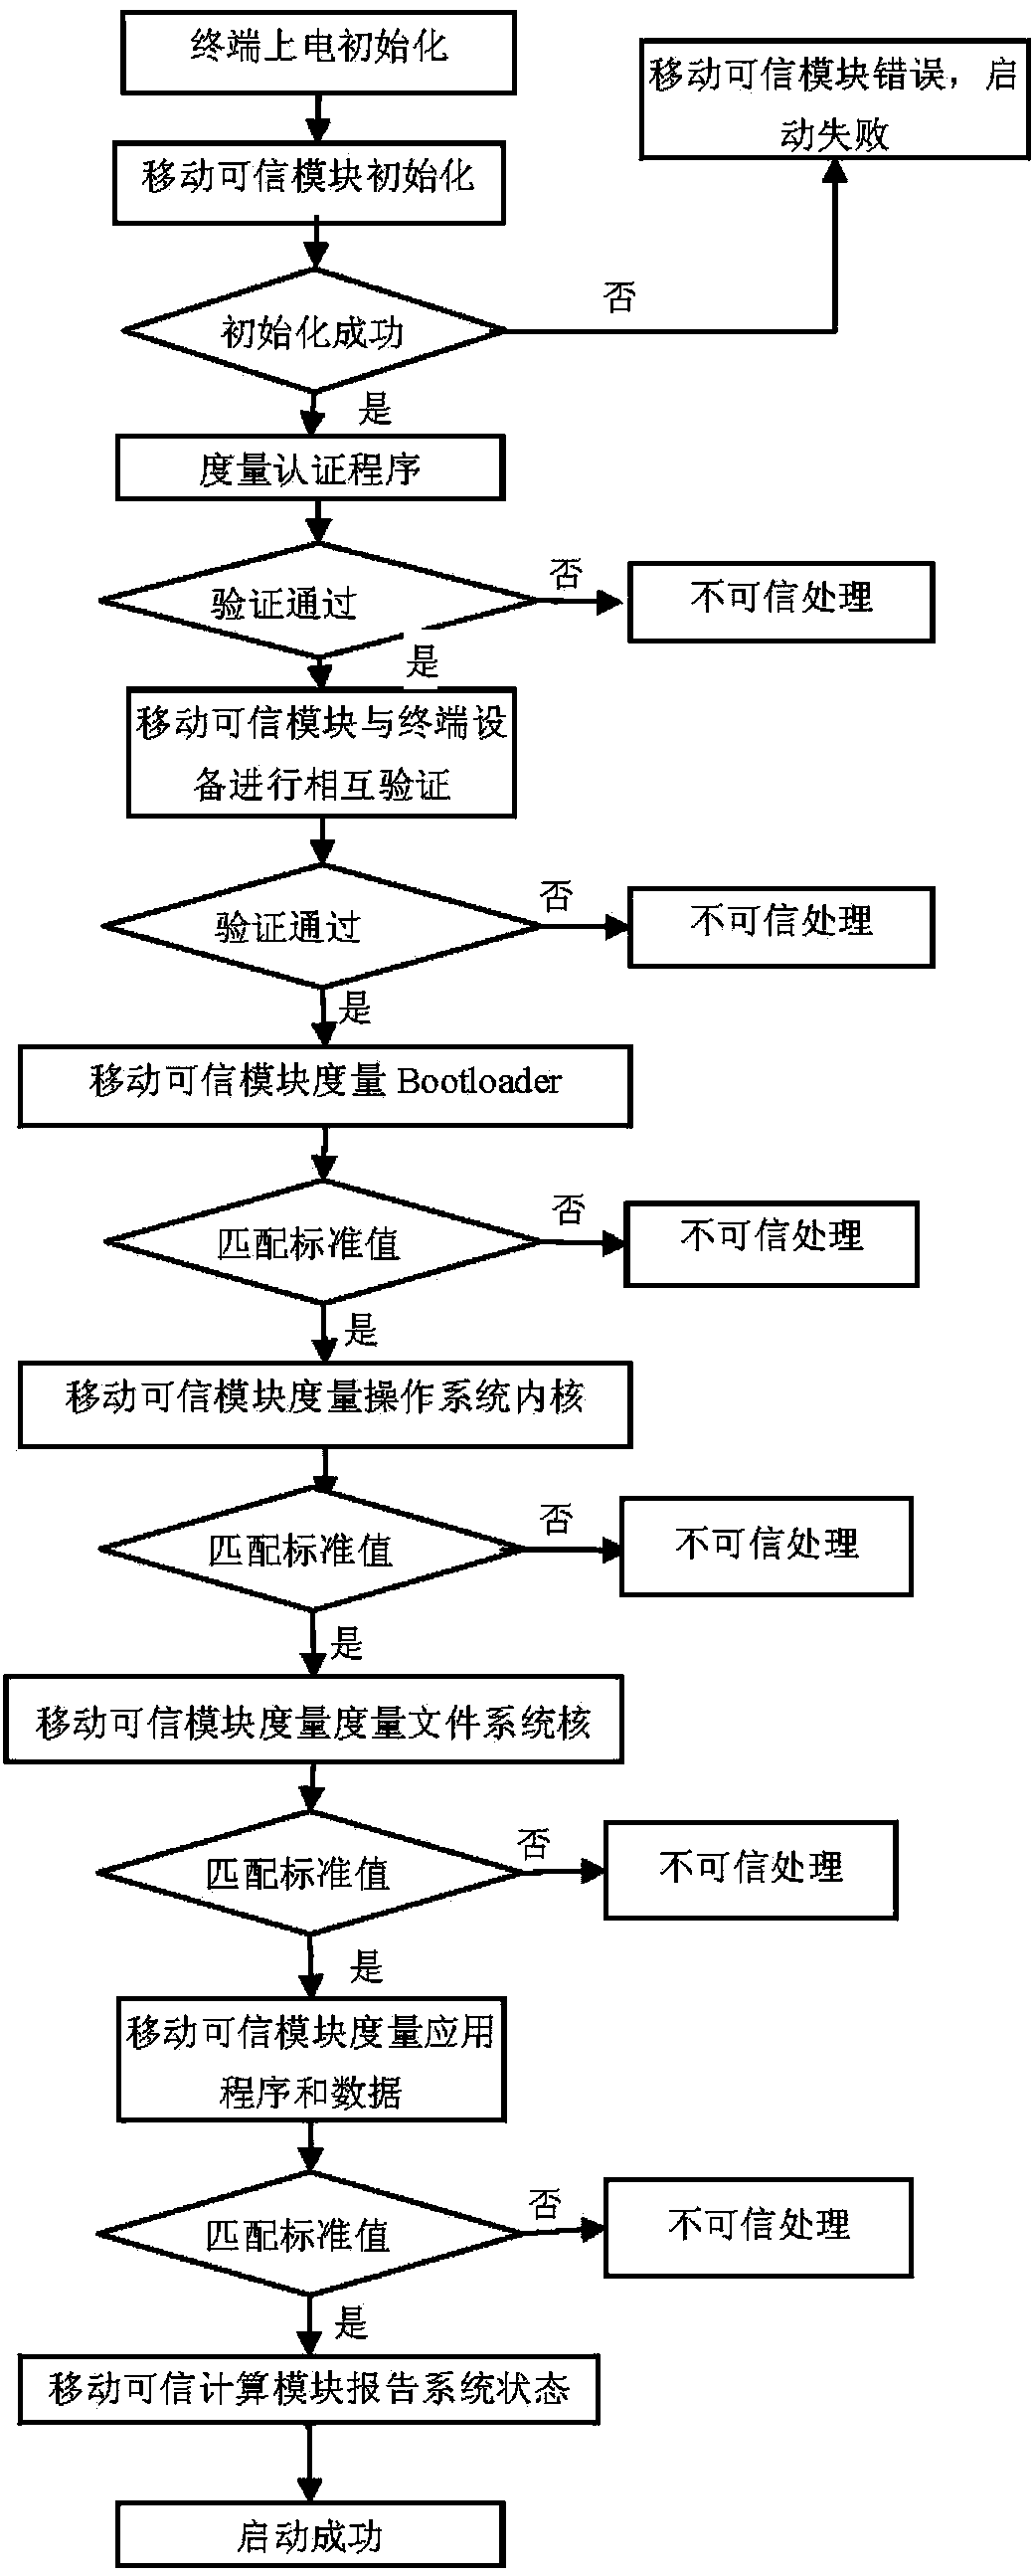 Embedded terminal dependable starting method based on mobile dependable computing module